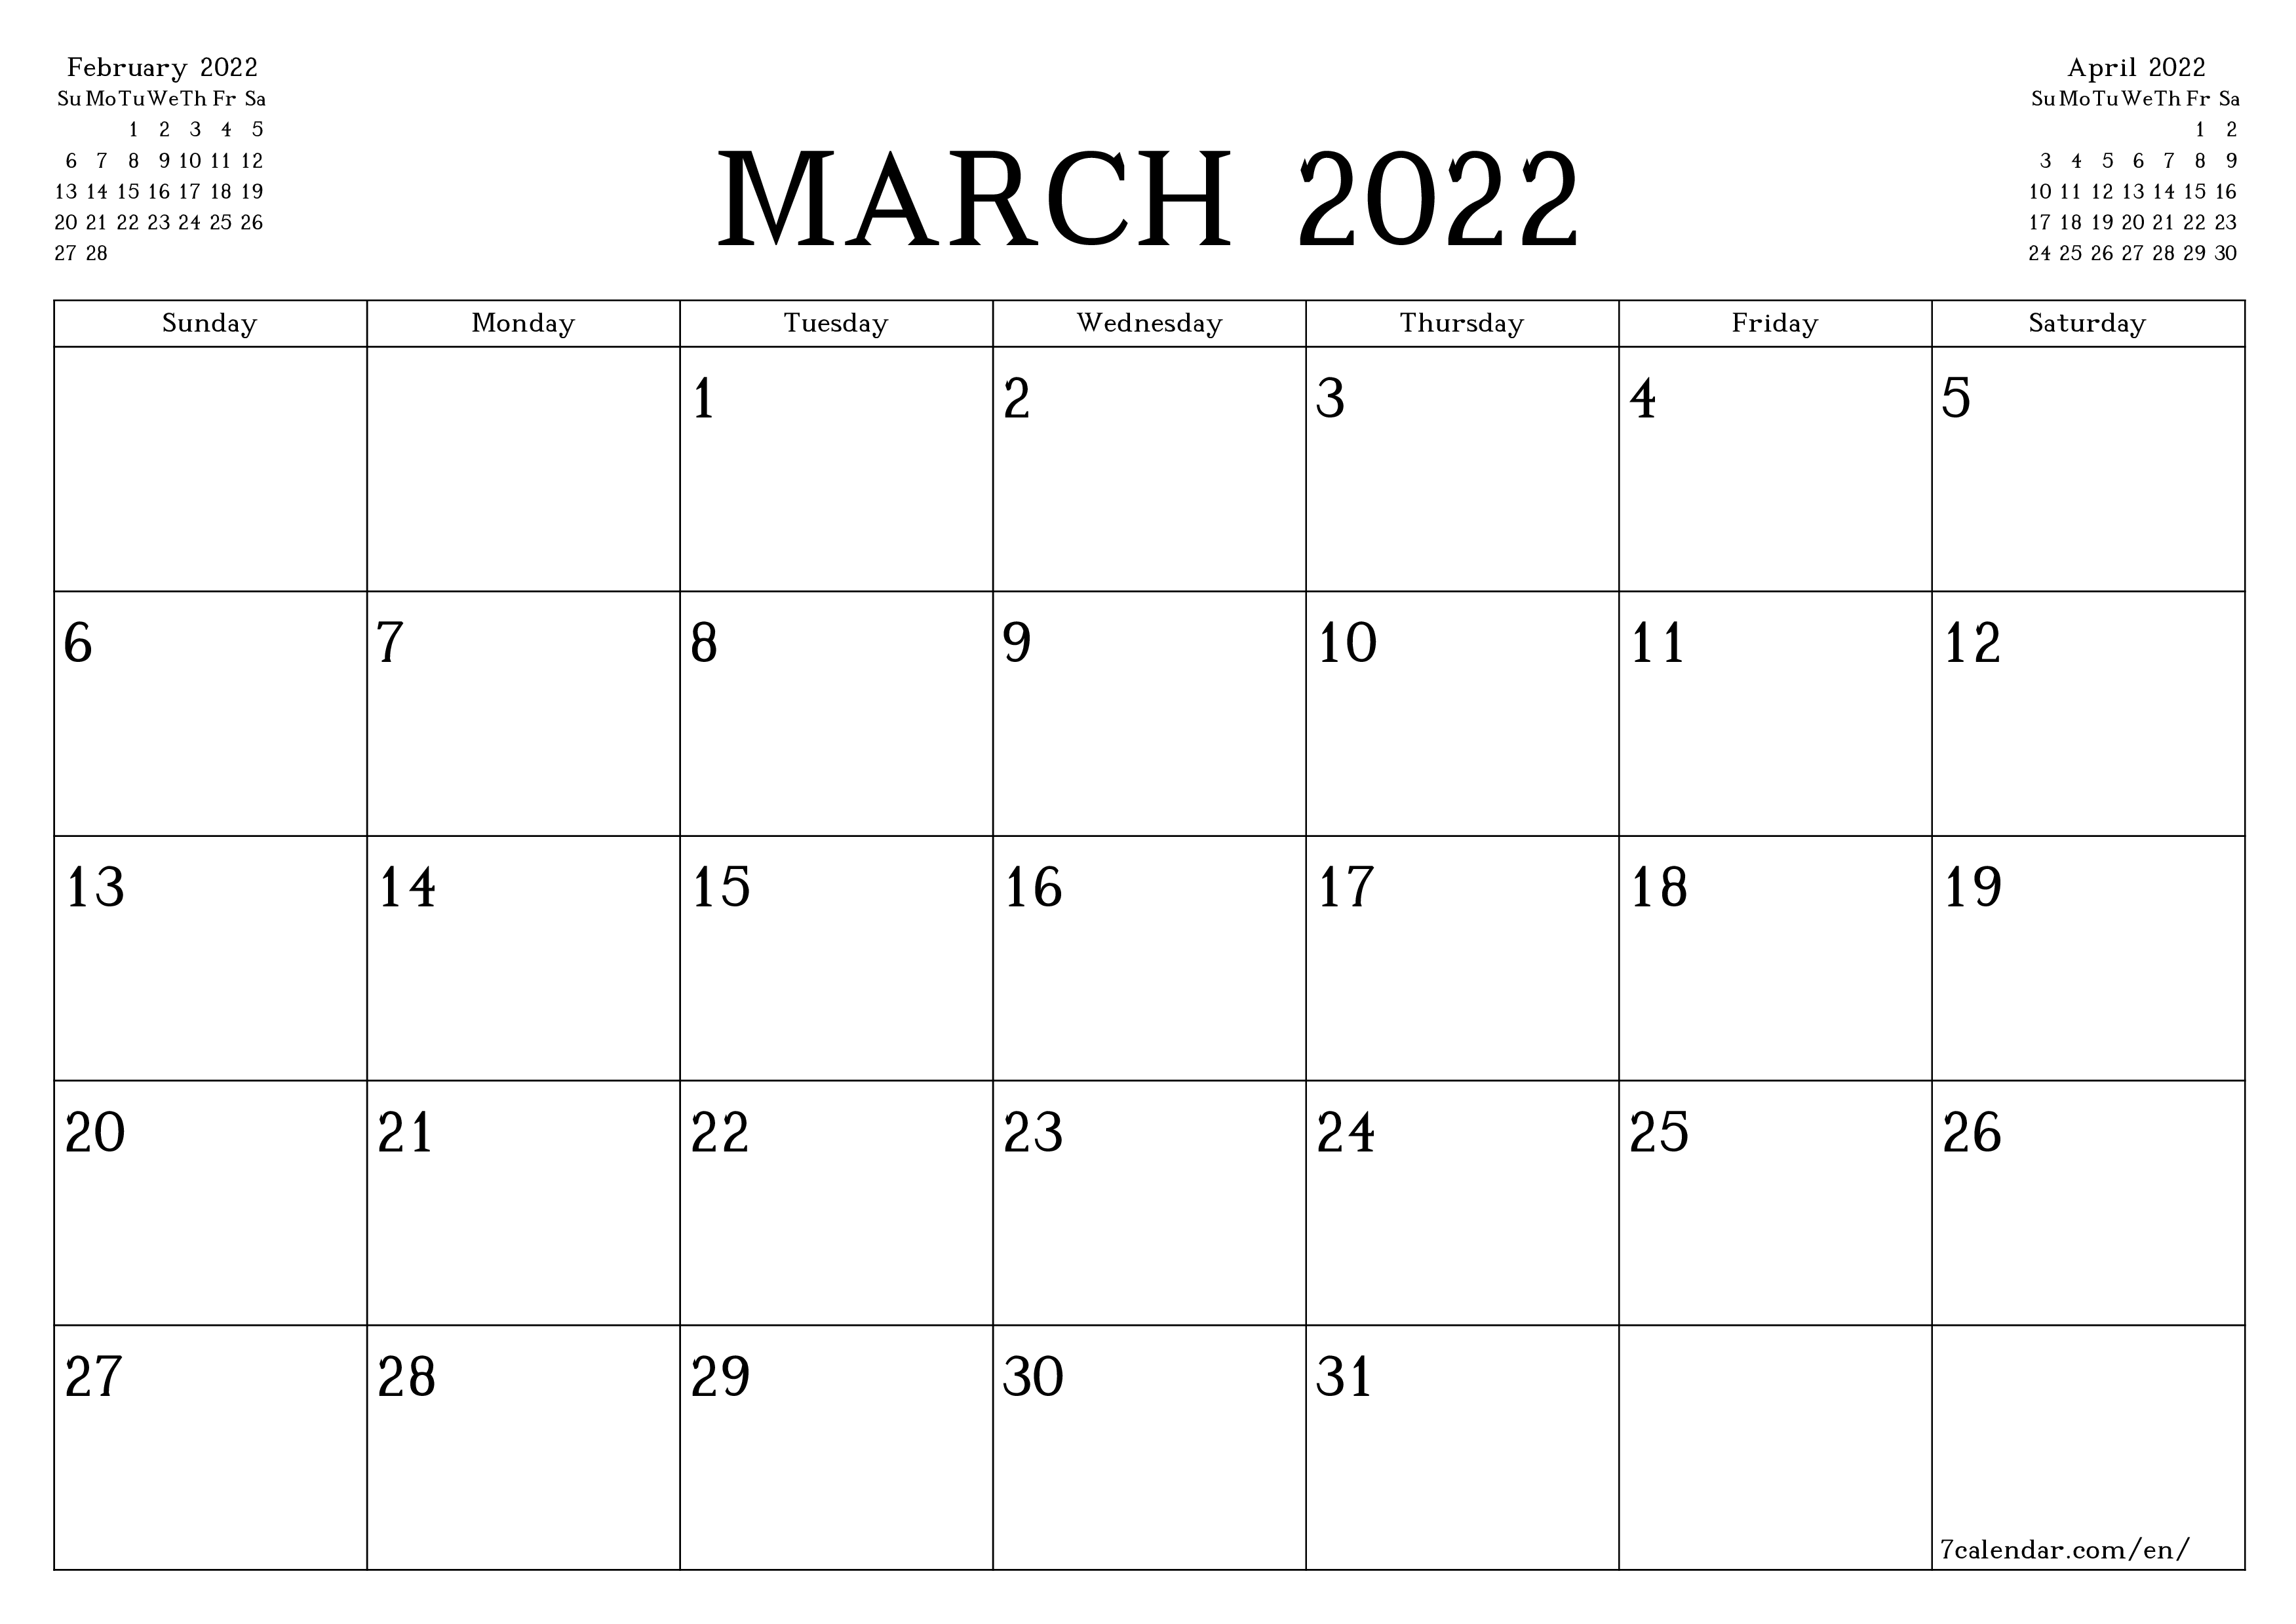 Monthly Calendar 2022 March 2022 Free Printable Calendars And Planners, Pdf Templates - 7Calendar